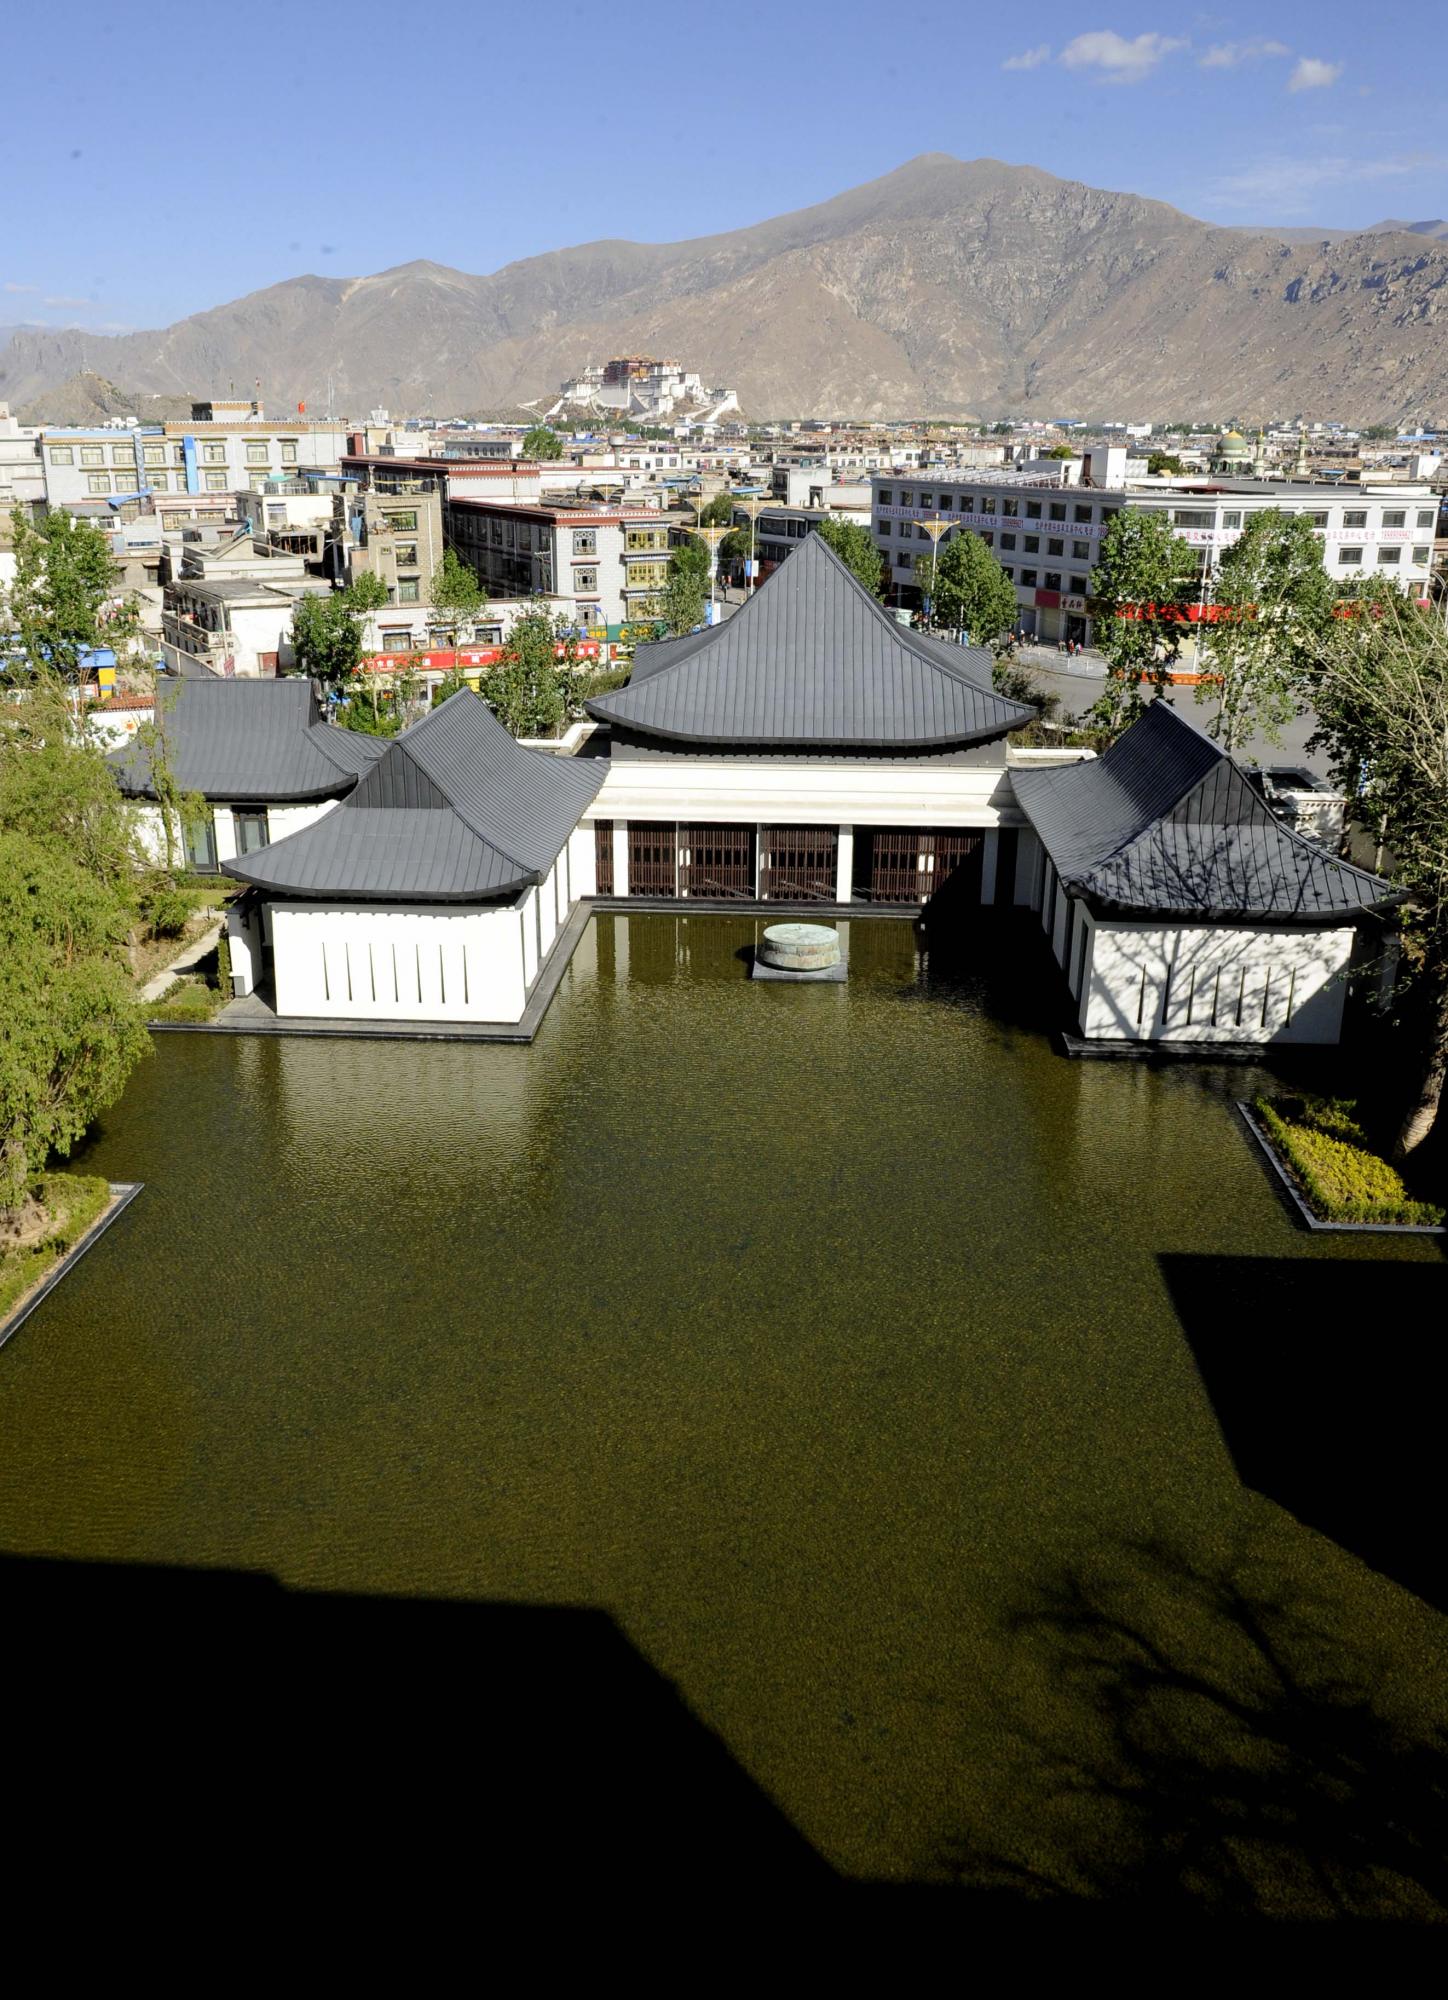 Tibet's first five-star hotel opens in Lhasa